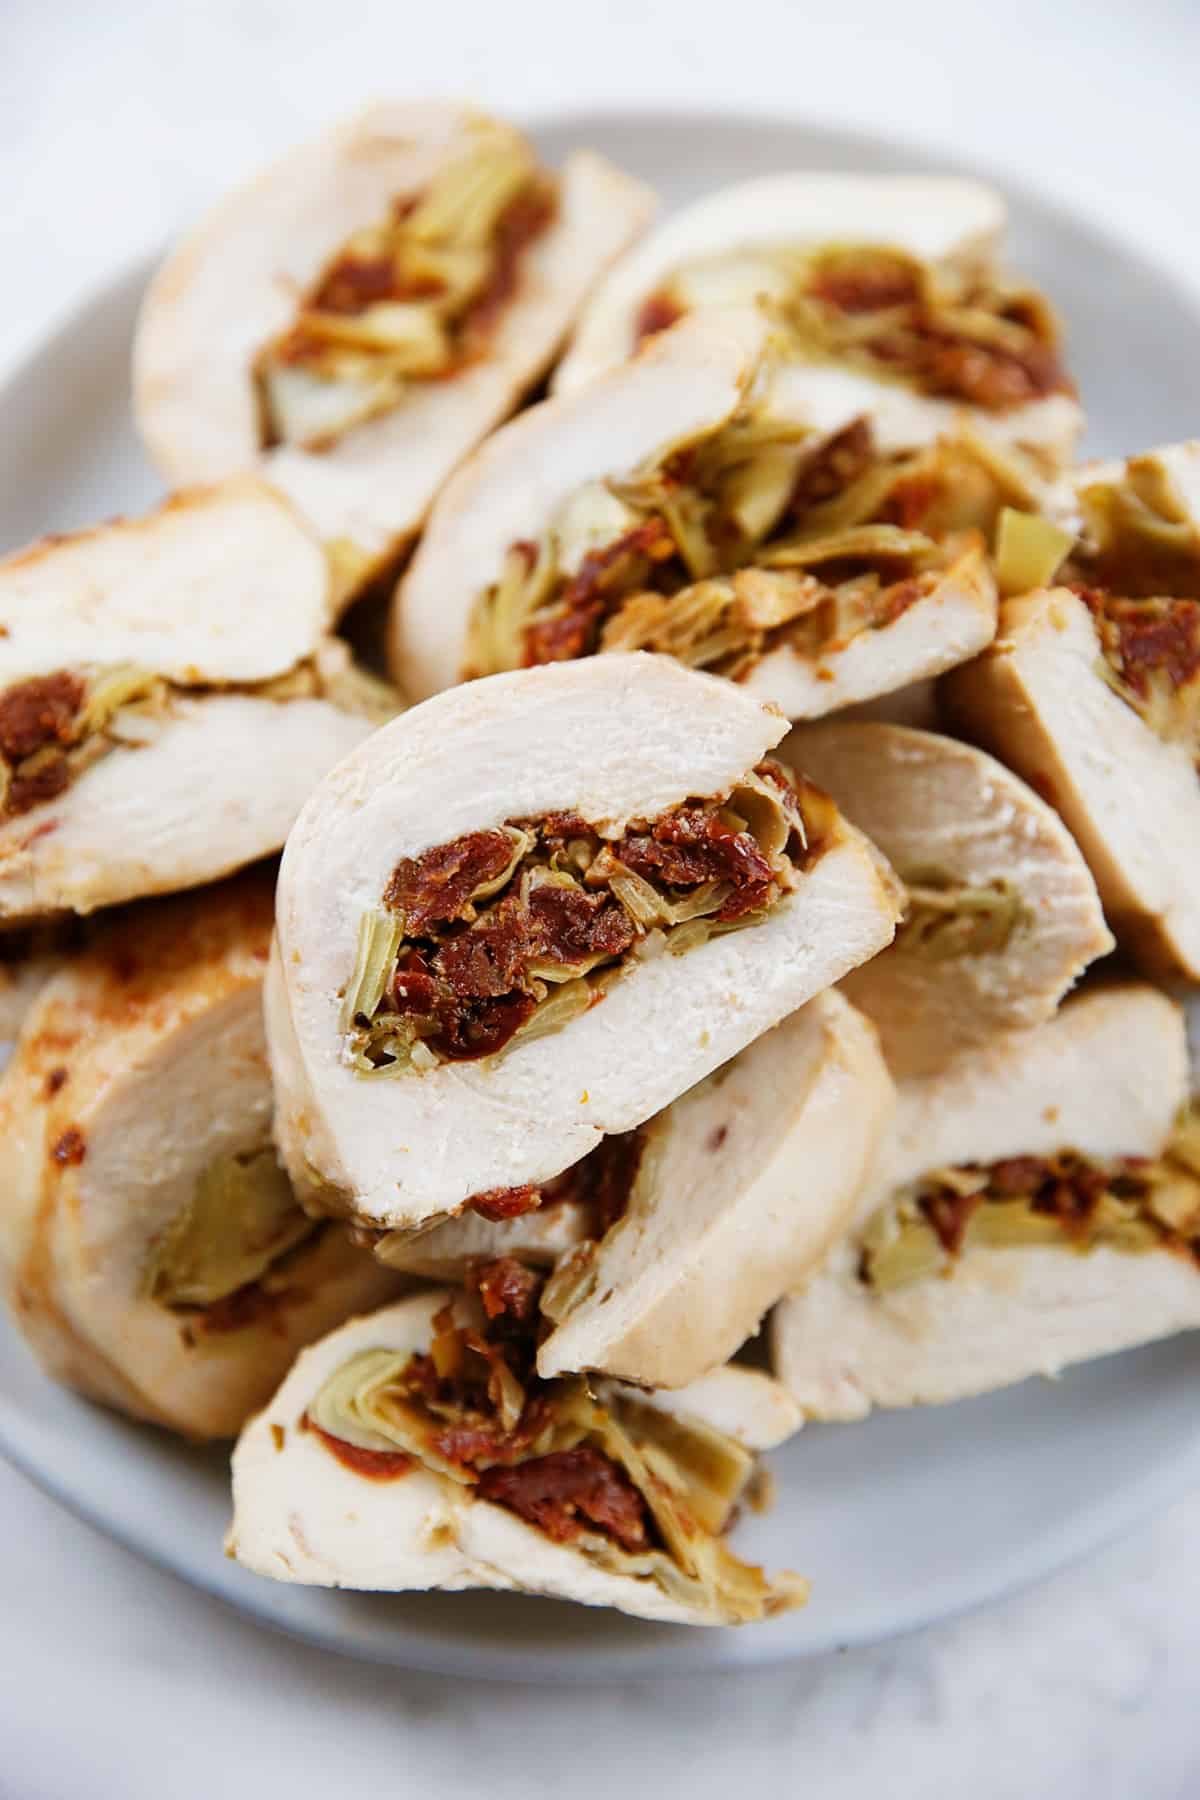 A chicken and sun dried tomato recipe baked up.